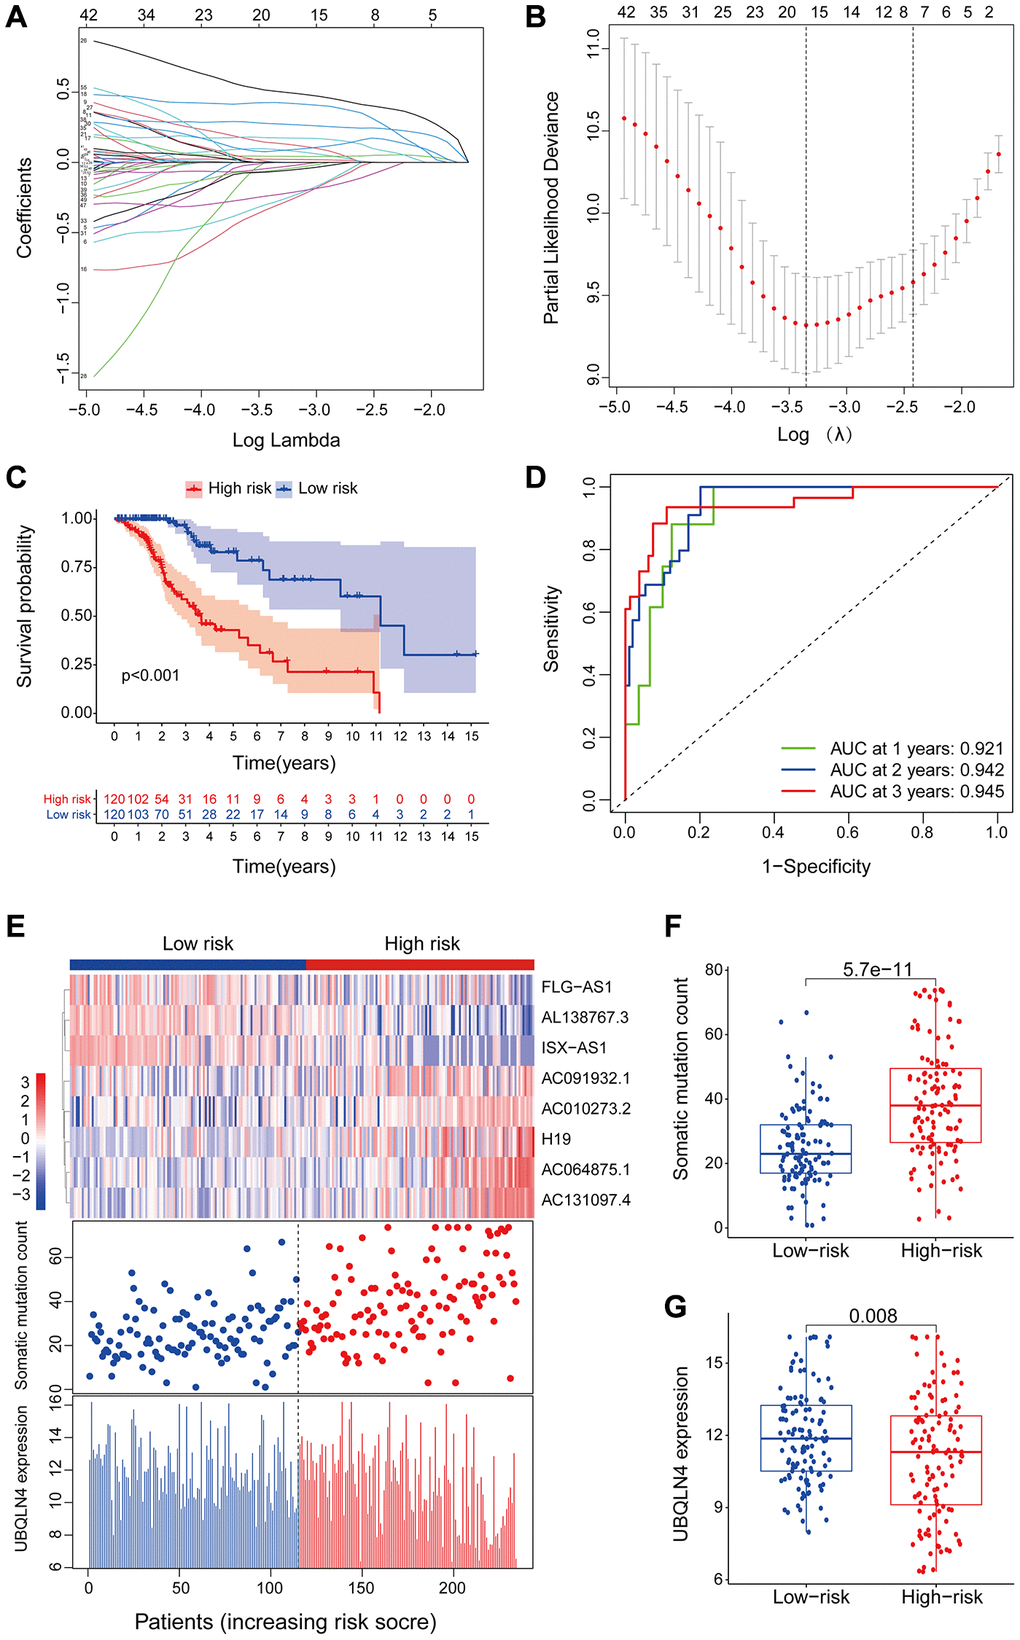 LncRNAs signature of the genomic instability used to predict outcomes in the training set. (A) Lasso Cox analysis identified 16 lncRNAs associated with genomic instability that were highly associated with prognosis. (B) Determination of the optimal value of penalty parameters through 1000 replicates of cross-validation. (C) Kaplan-Meier estimation of GILncSig-predicted overall survival of low- or high-risk patients in the training set. (D) Time-dependent ROC curves of GILncSig at 1, 2 and 3 years. (E) Distribution of cumulative somatic mutations and expression of UBQLN4 in high- and low-risk groups in the GILncSig model of low-grade glioma patients. (F) Box plot for distribution of cumulative somatic mutations in the low- and high-risk groups of LGG patients. (G) Box plots for UBQLN4 gene expression in low- and high-risk groups of LGG patients.